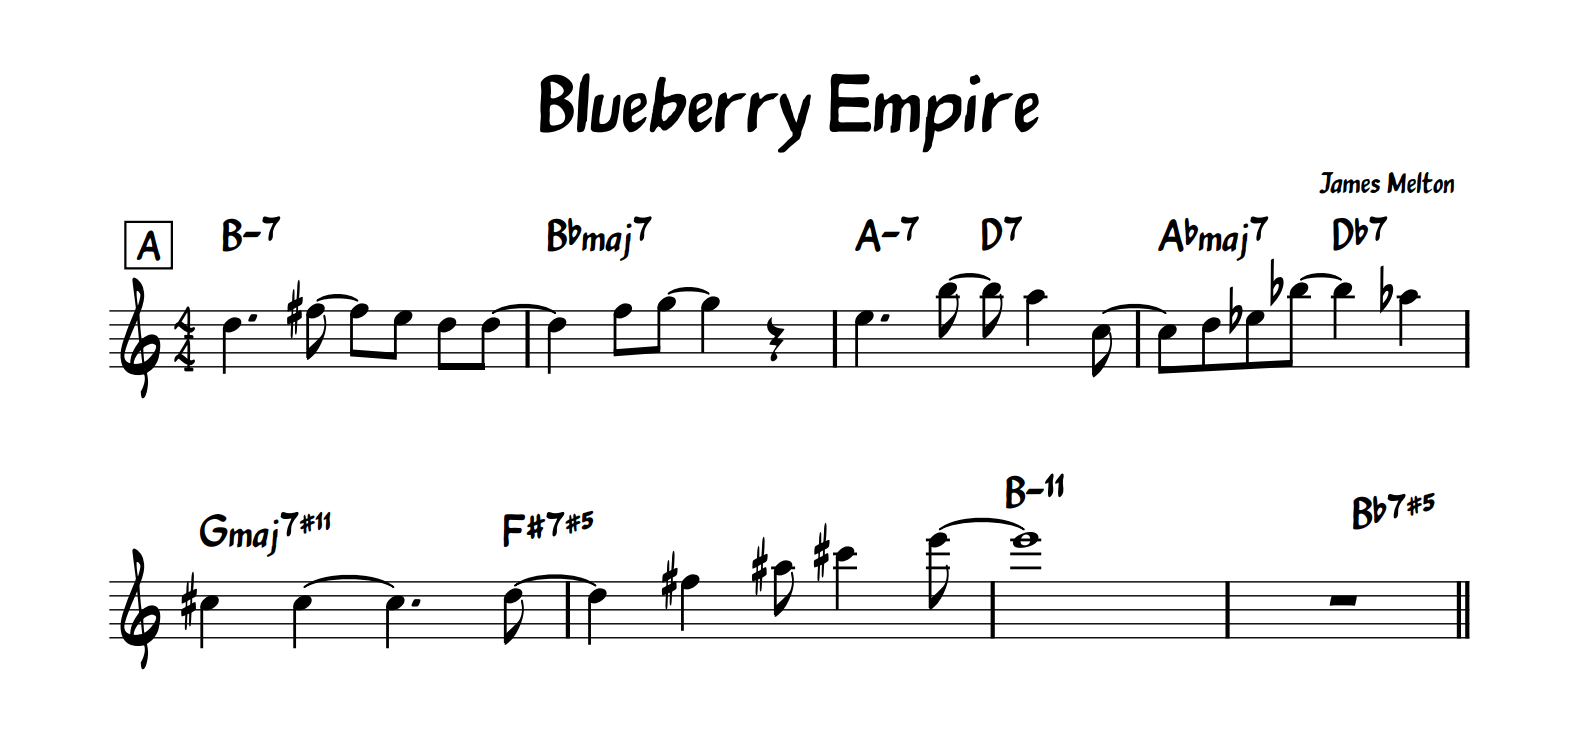 Lead Sheet Jazz tutorial: Lead Sheet Formatted To Have 4 Bars Per System